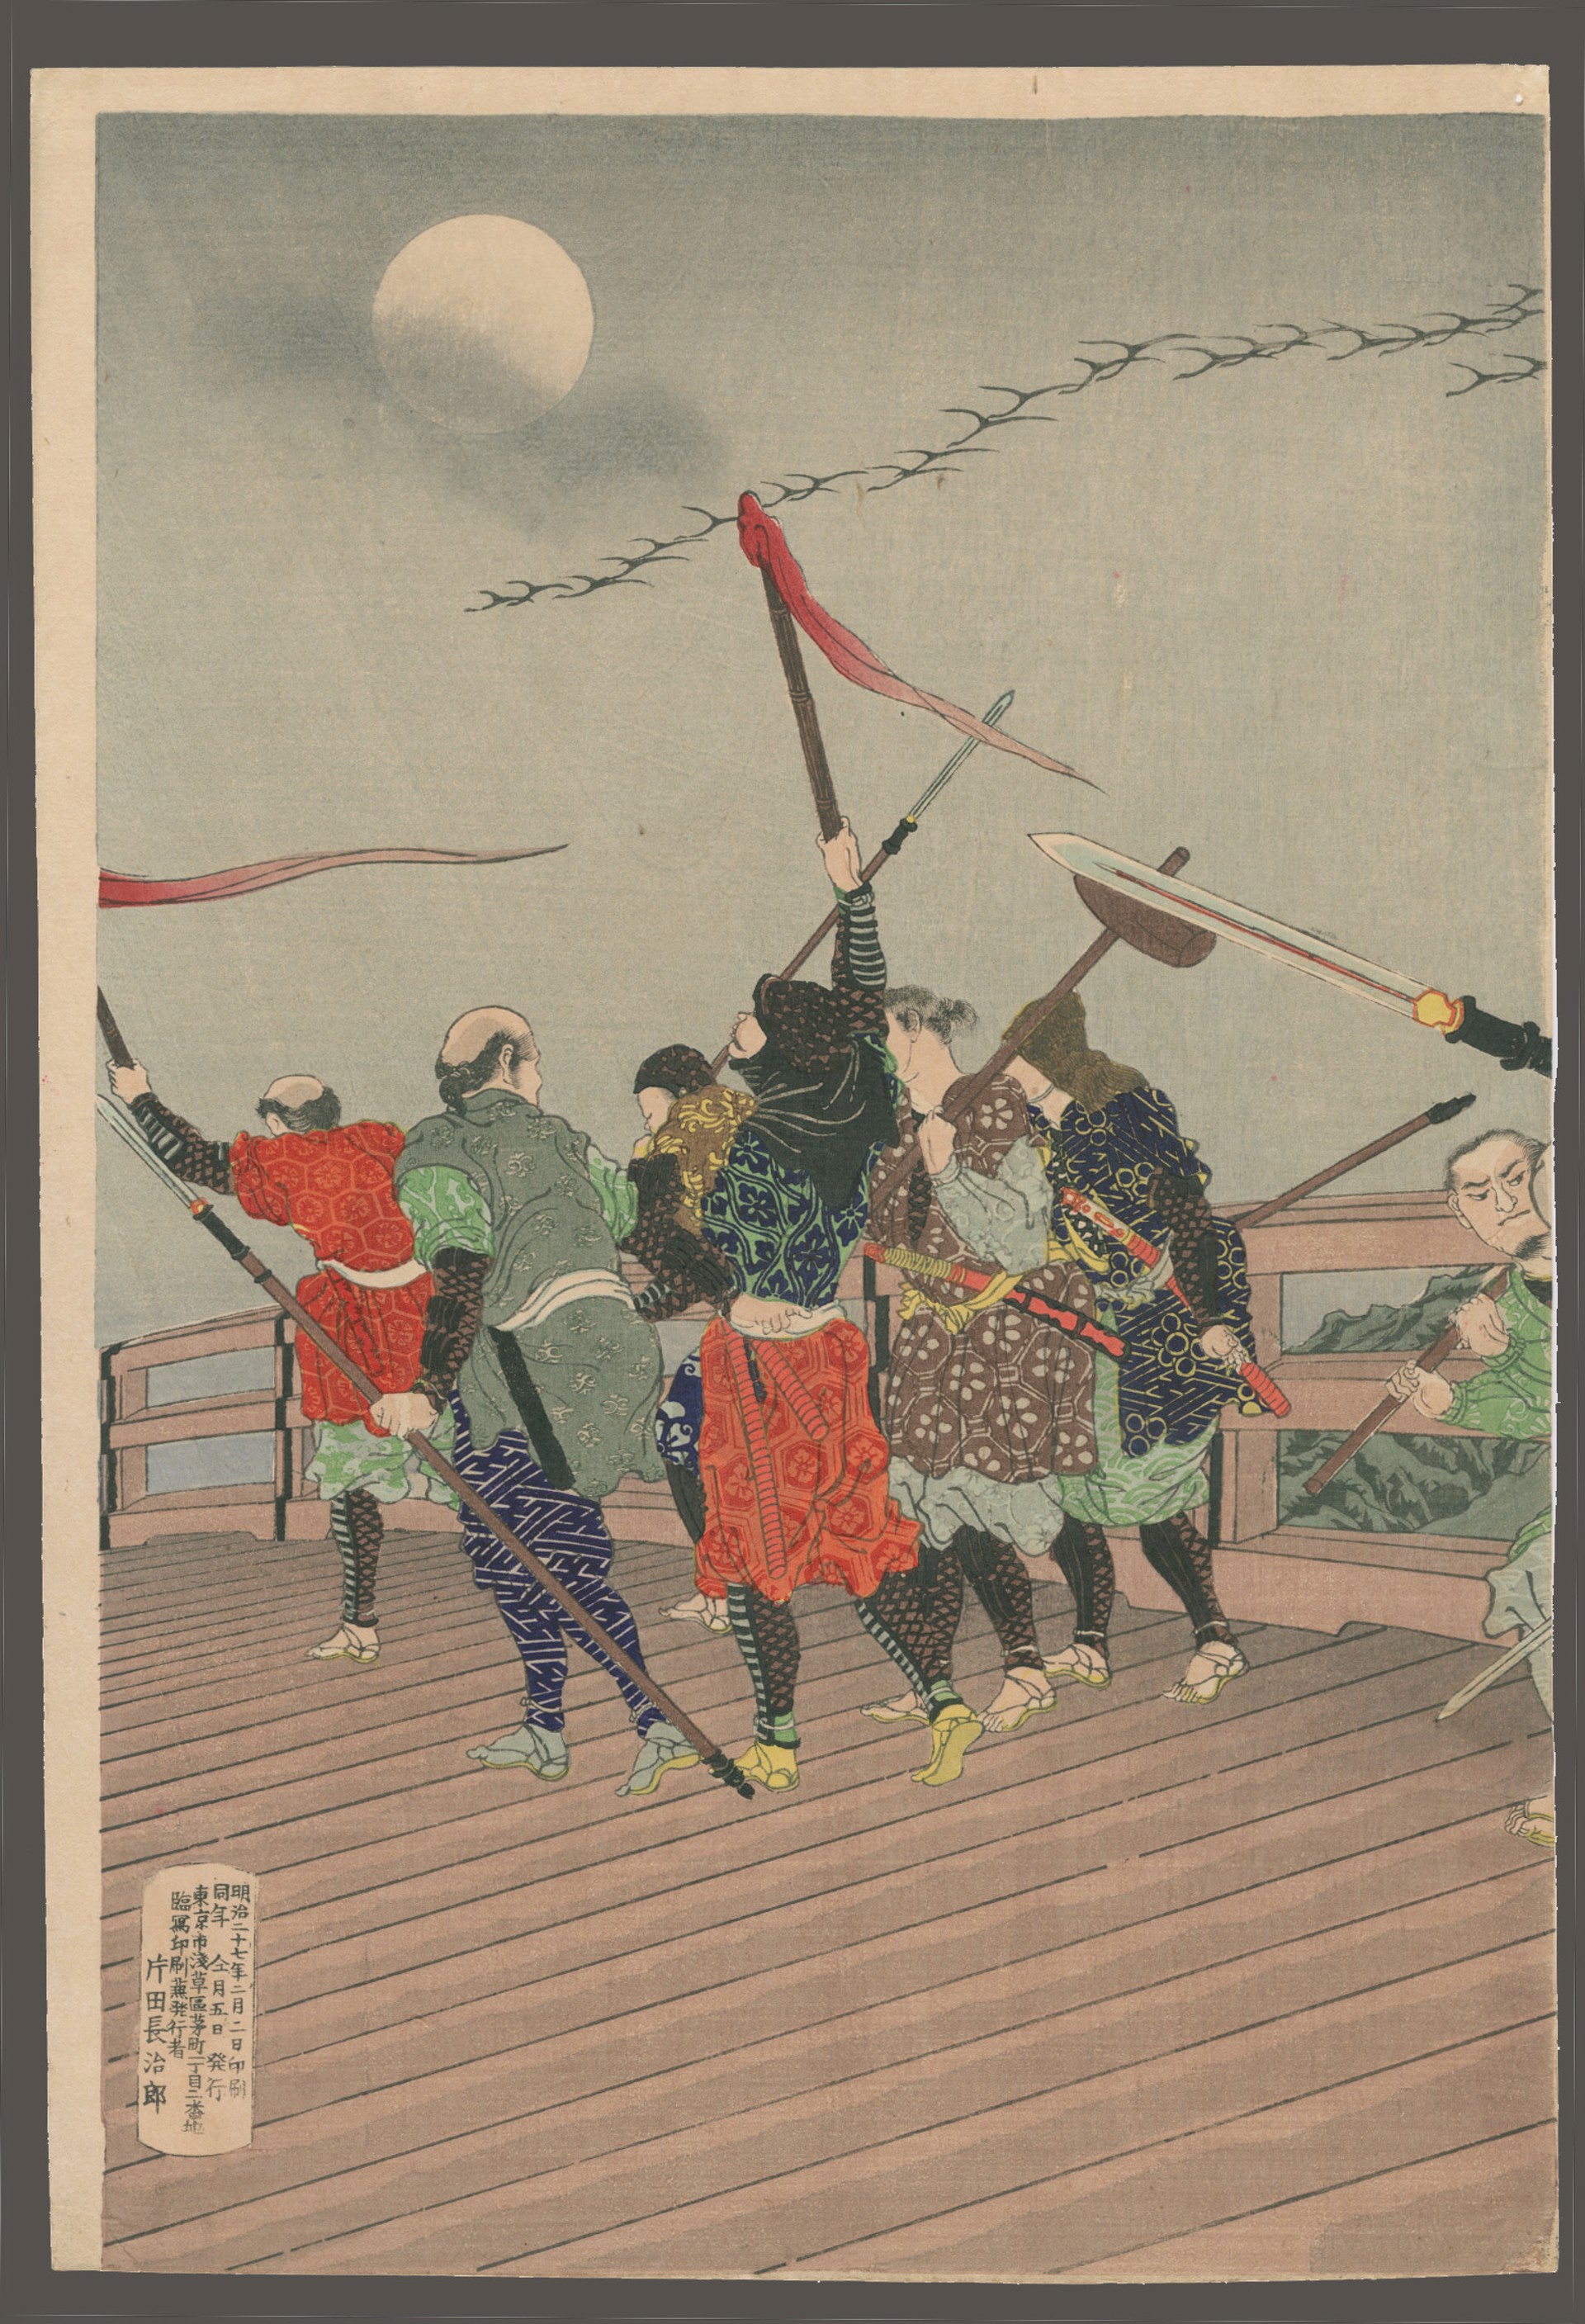 A Mirror of Valient Warriors: Descening Geese at Yahagi Bridge 8 Views of Fine Tales of Warriors by Yoshitoshi